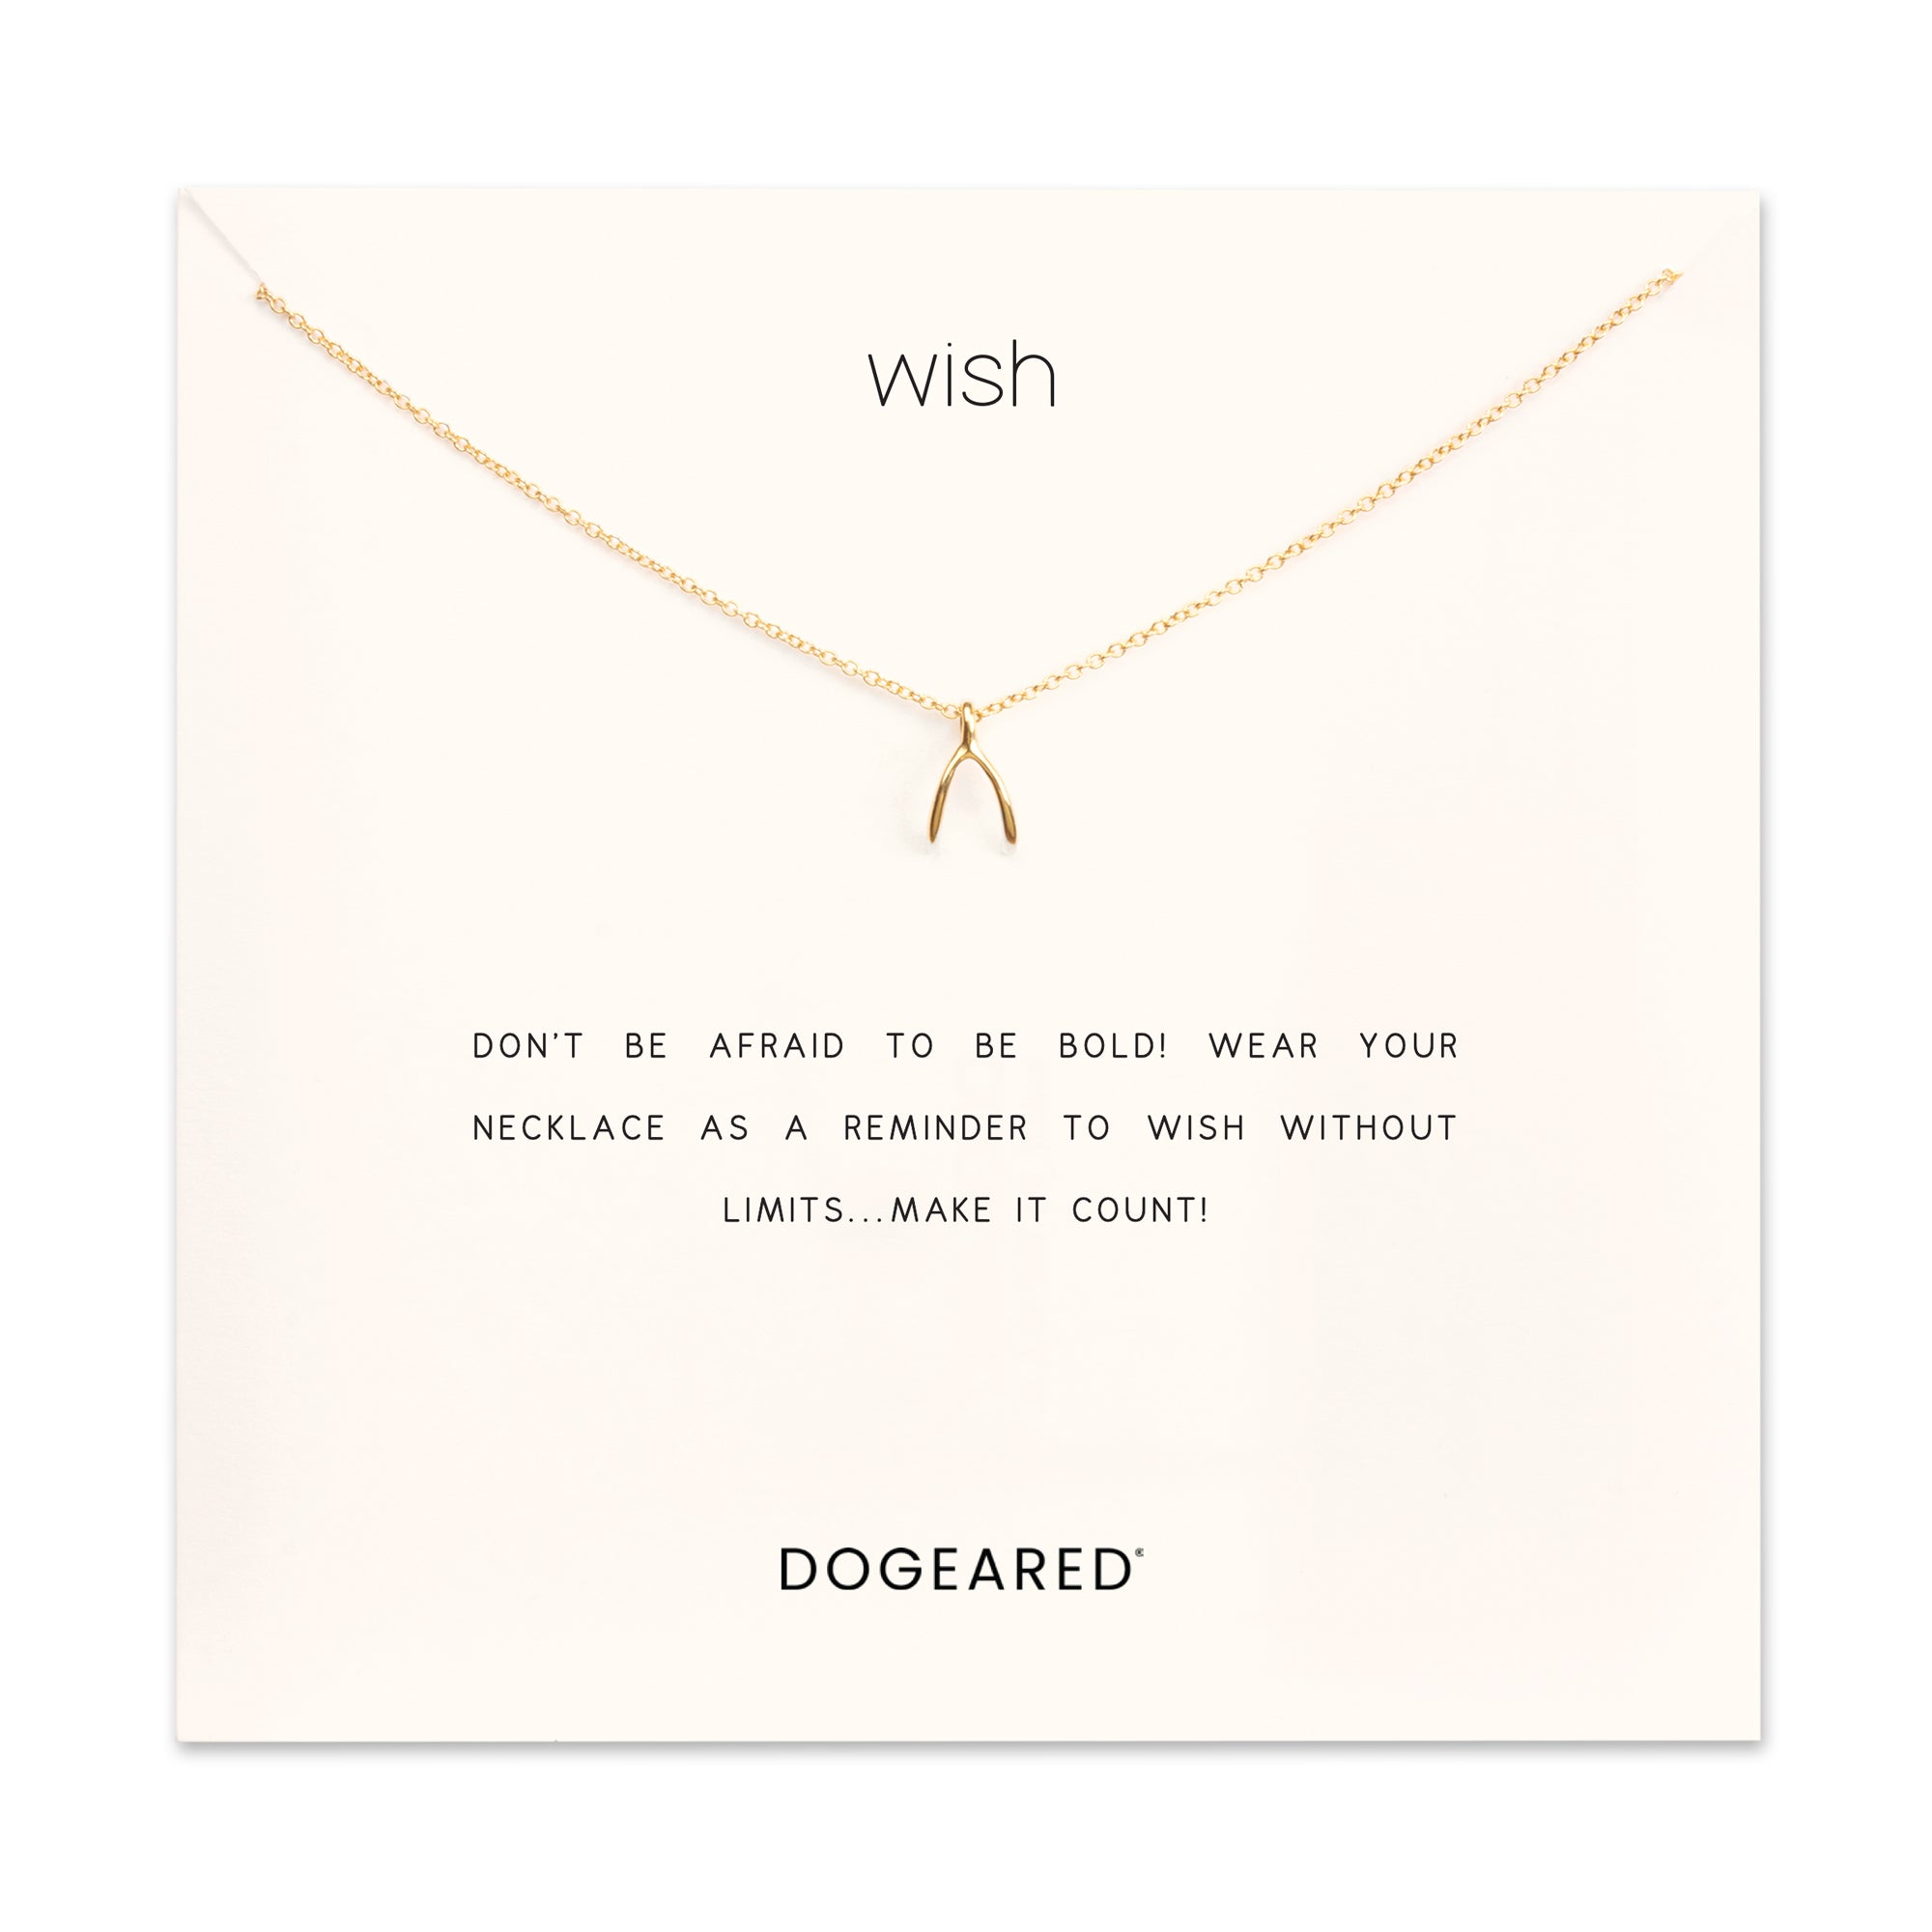 Wish necklace - Dogeared